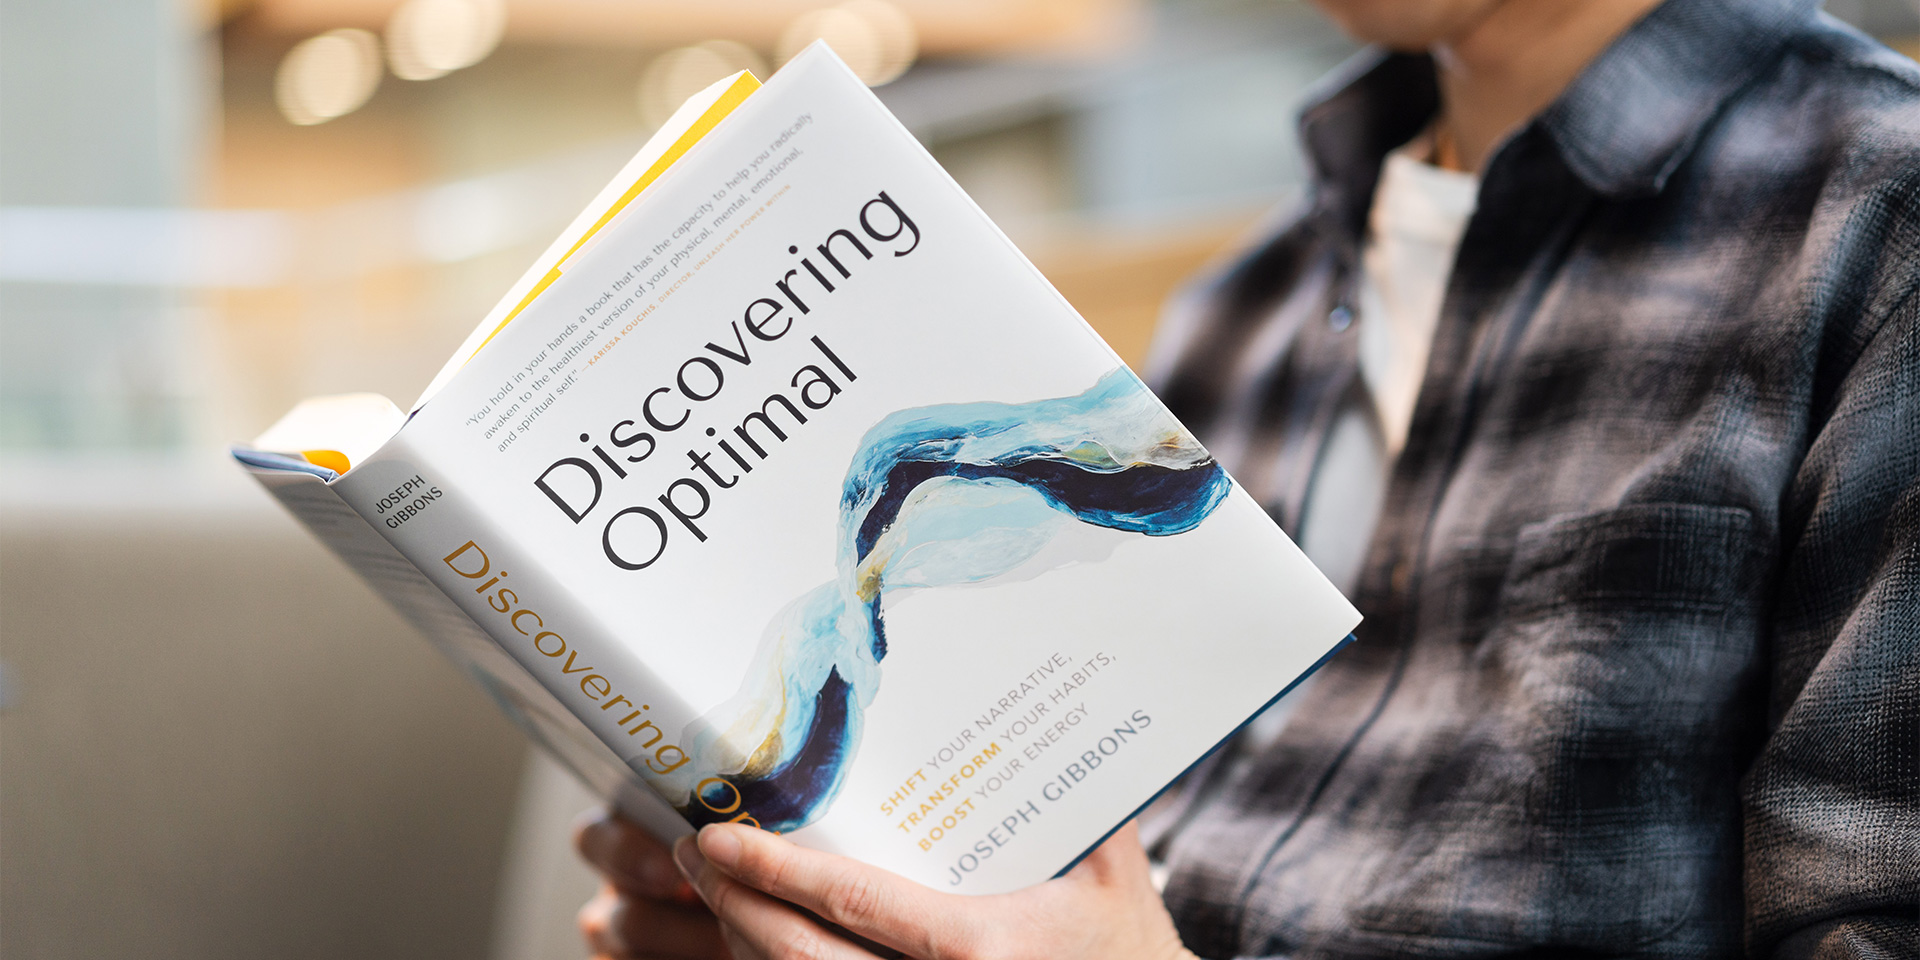 Someone holding a book titled, "Discovering Optimal"